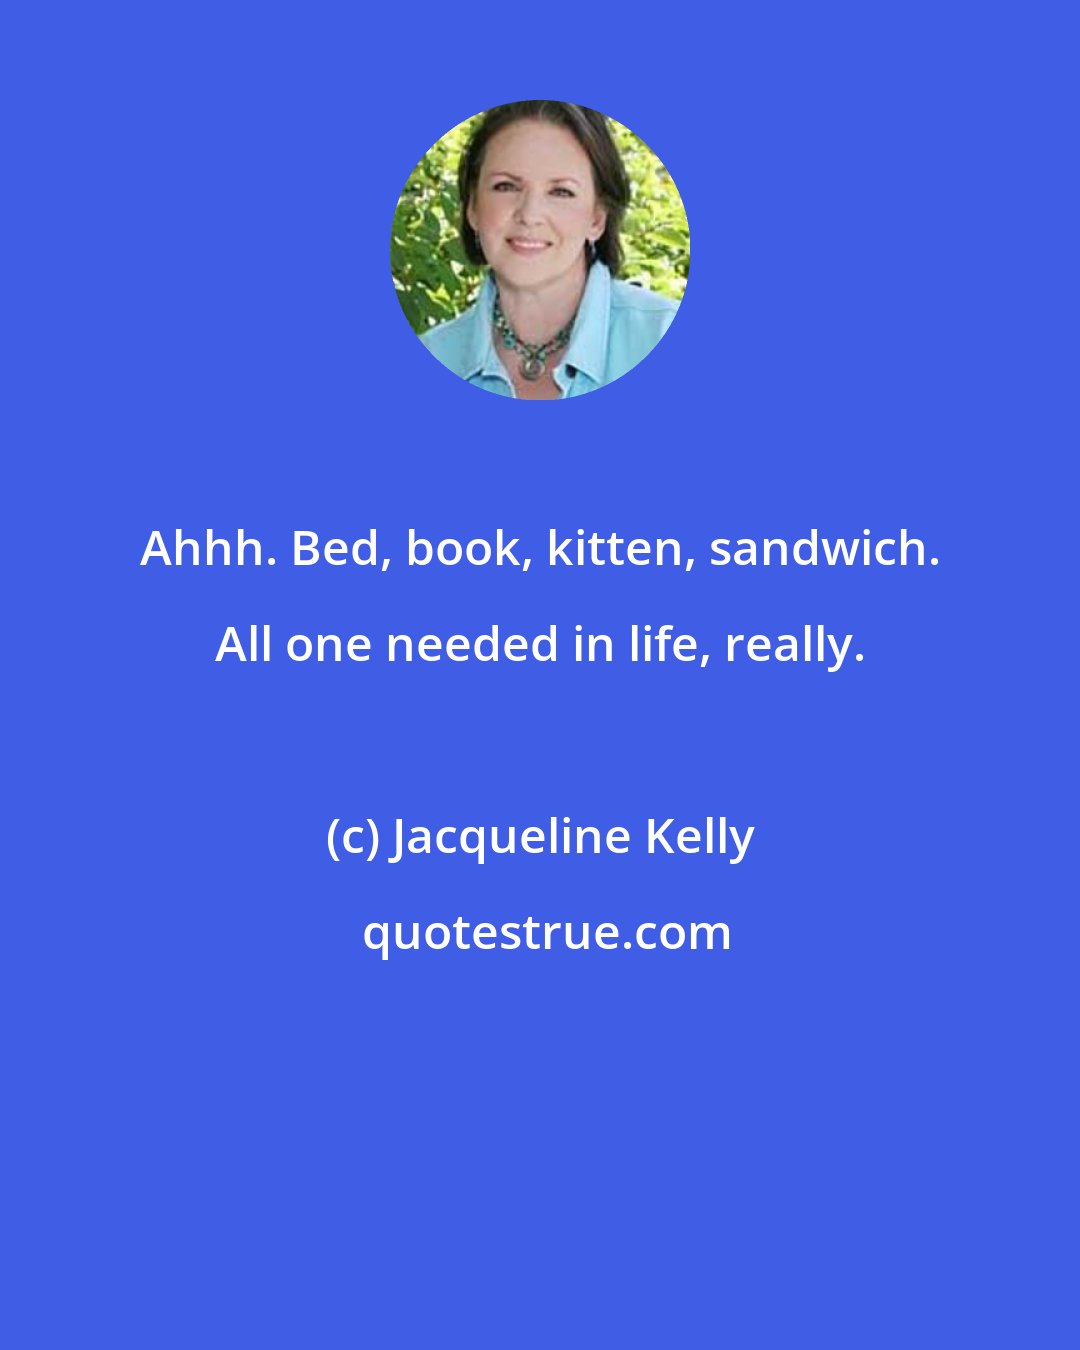 Jacqueline Kelly: Ahhh. Bed, book, kitten, sandwich. All one needed in life, really.